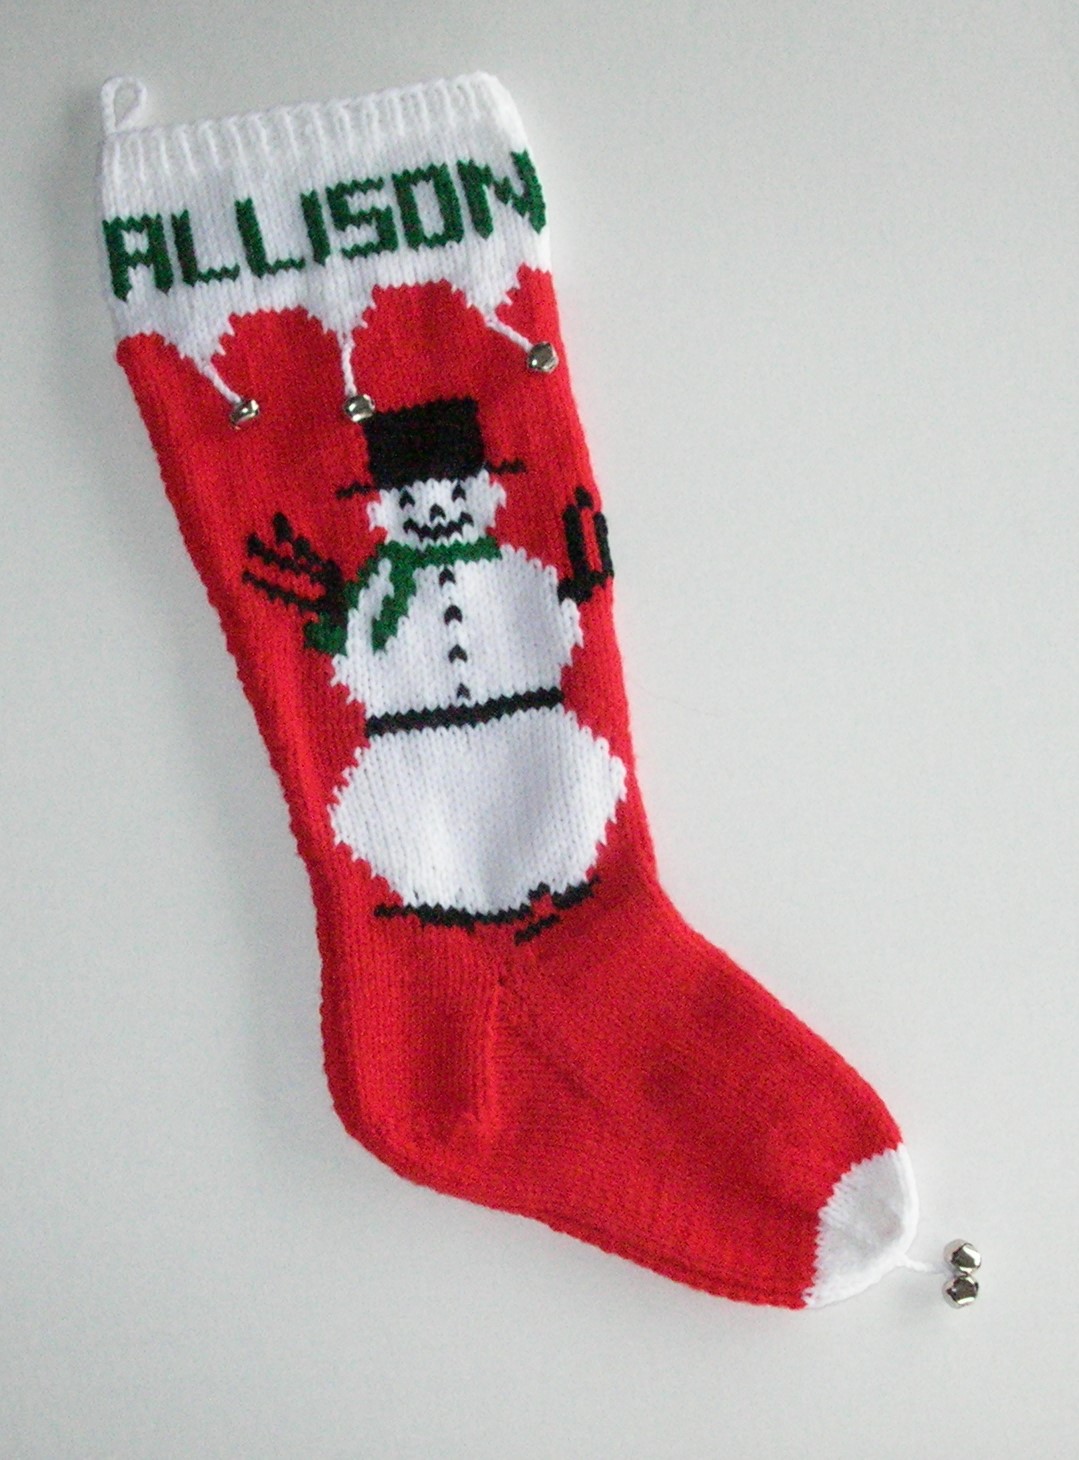 Snowman with green scarf on red and white hand knit Christmas stocking, personalized at top, and embellished with silver bells.